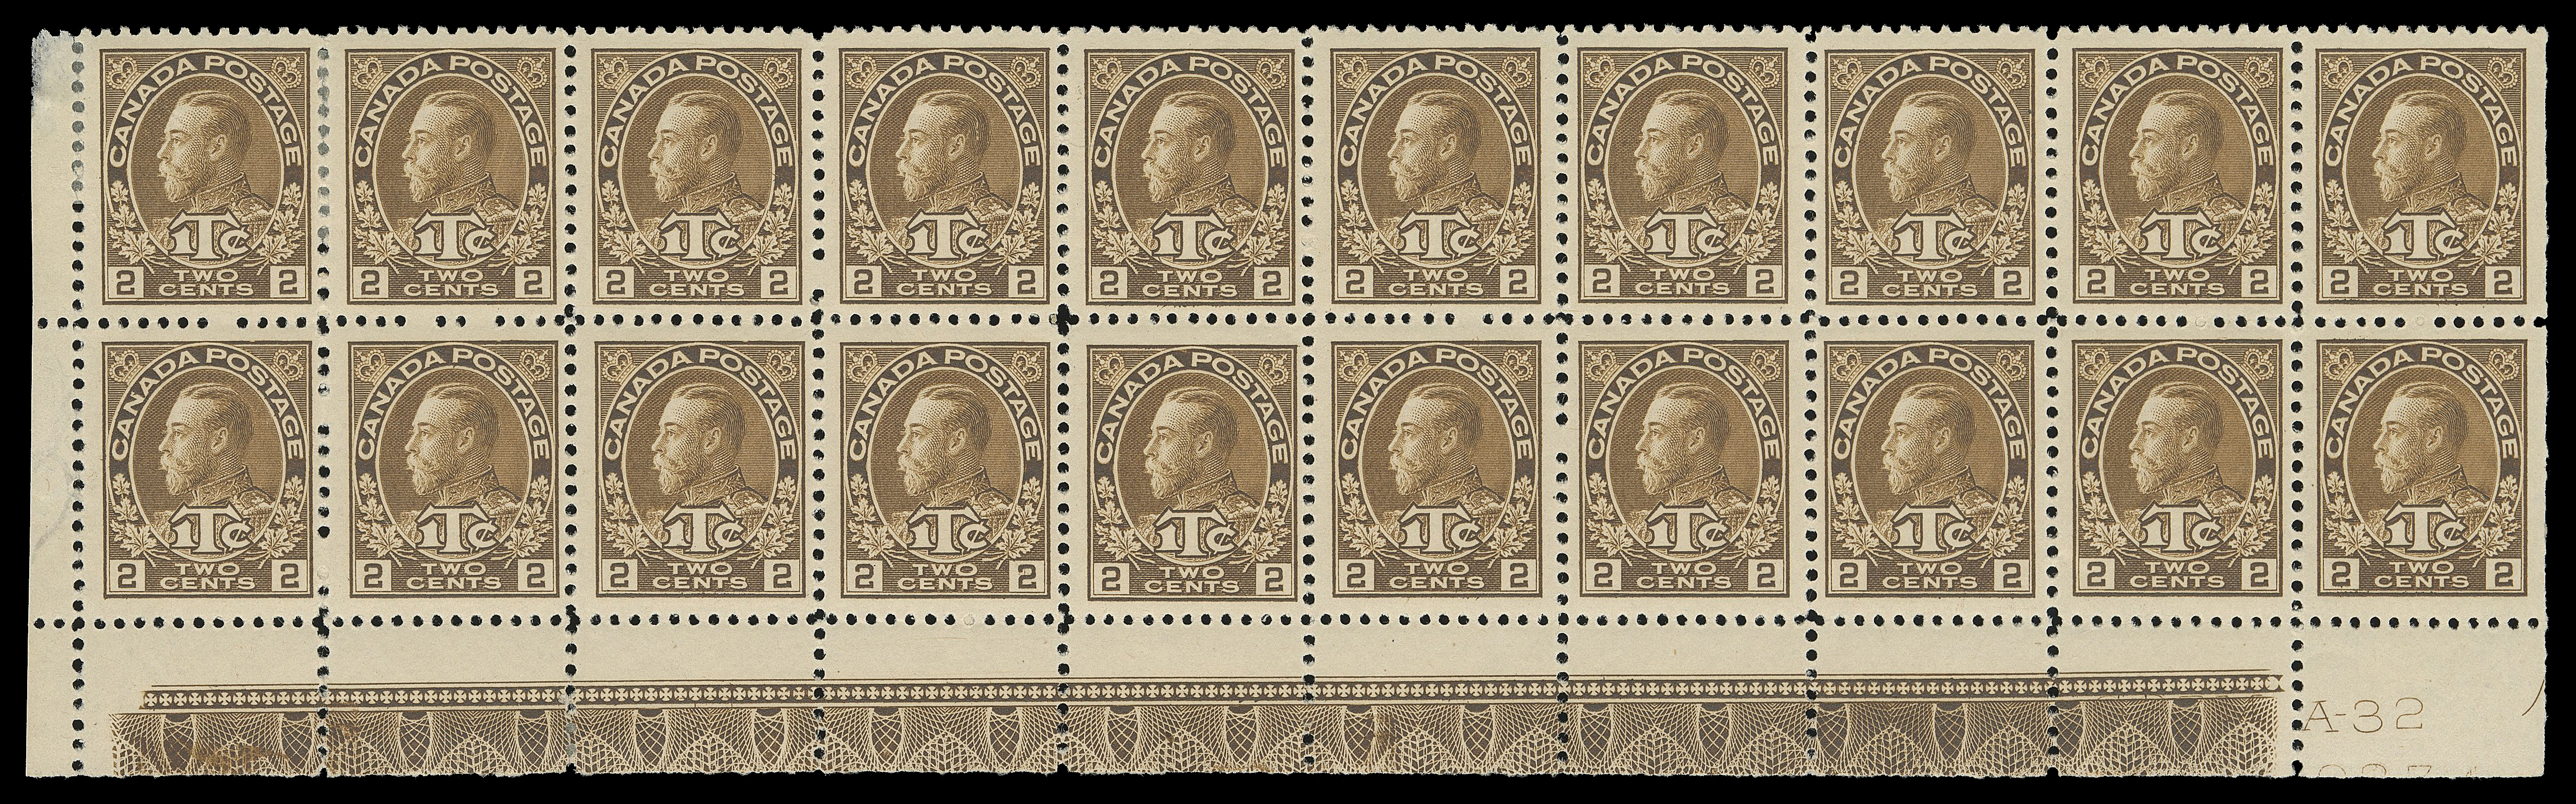 ADMIRAL STAMPS  MR4,A nicely centered lower left block of twenty, plate "A32" and portion of printing order number below Position 100 and strong, full Type A lathework on others, the imprint "OTTAWA No 32" and printing order number "937M" are visible under the lathework at Positions 92, 93, 99; hinged on top left pair, both straight edged stamps and in margin, minor perf separation at top left, sixteen stamps are NH, VF, a rarely seen intact lathework block. (Unitrade cat. $7,500) 